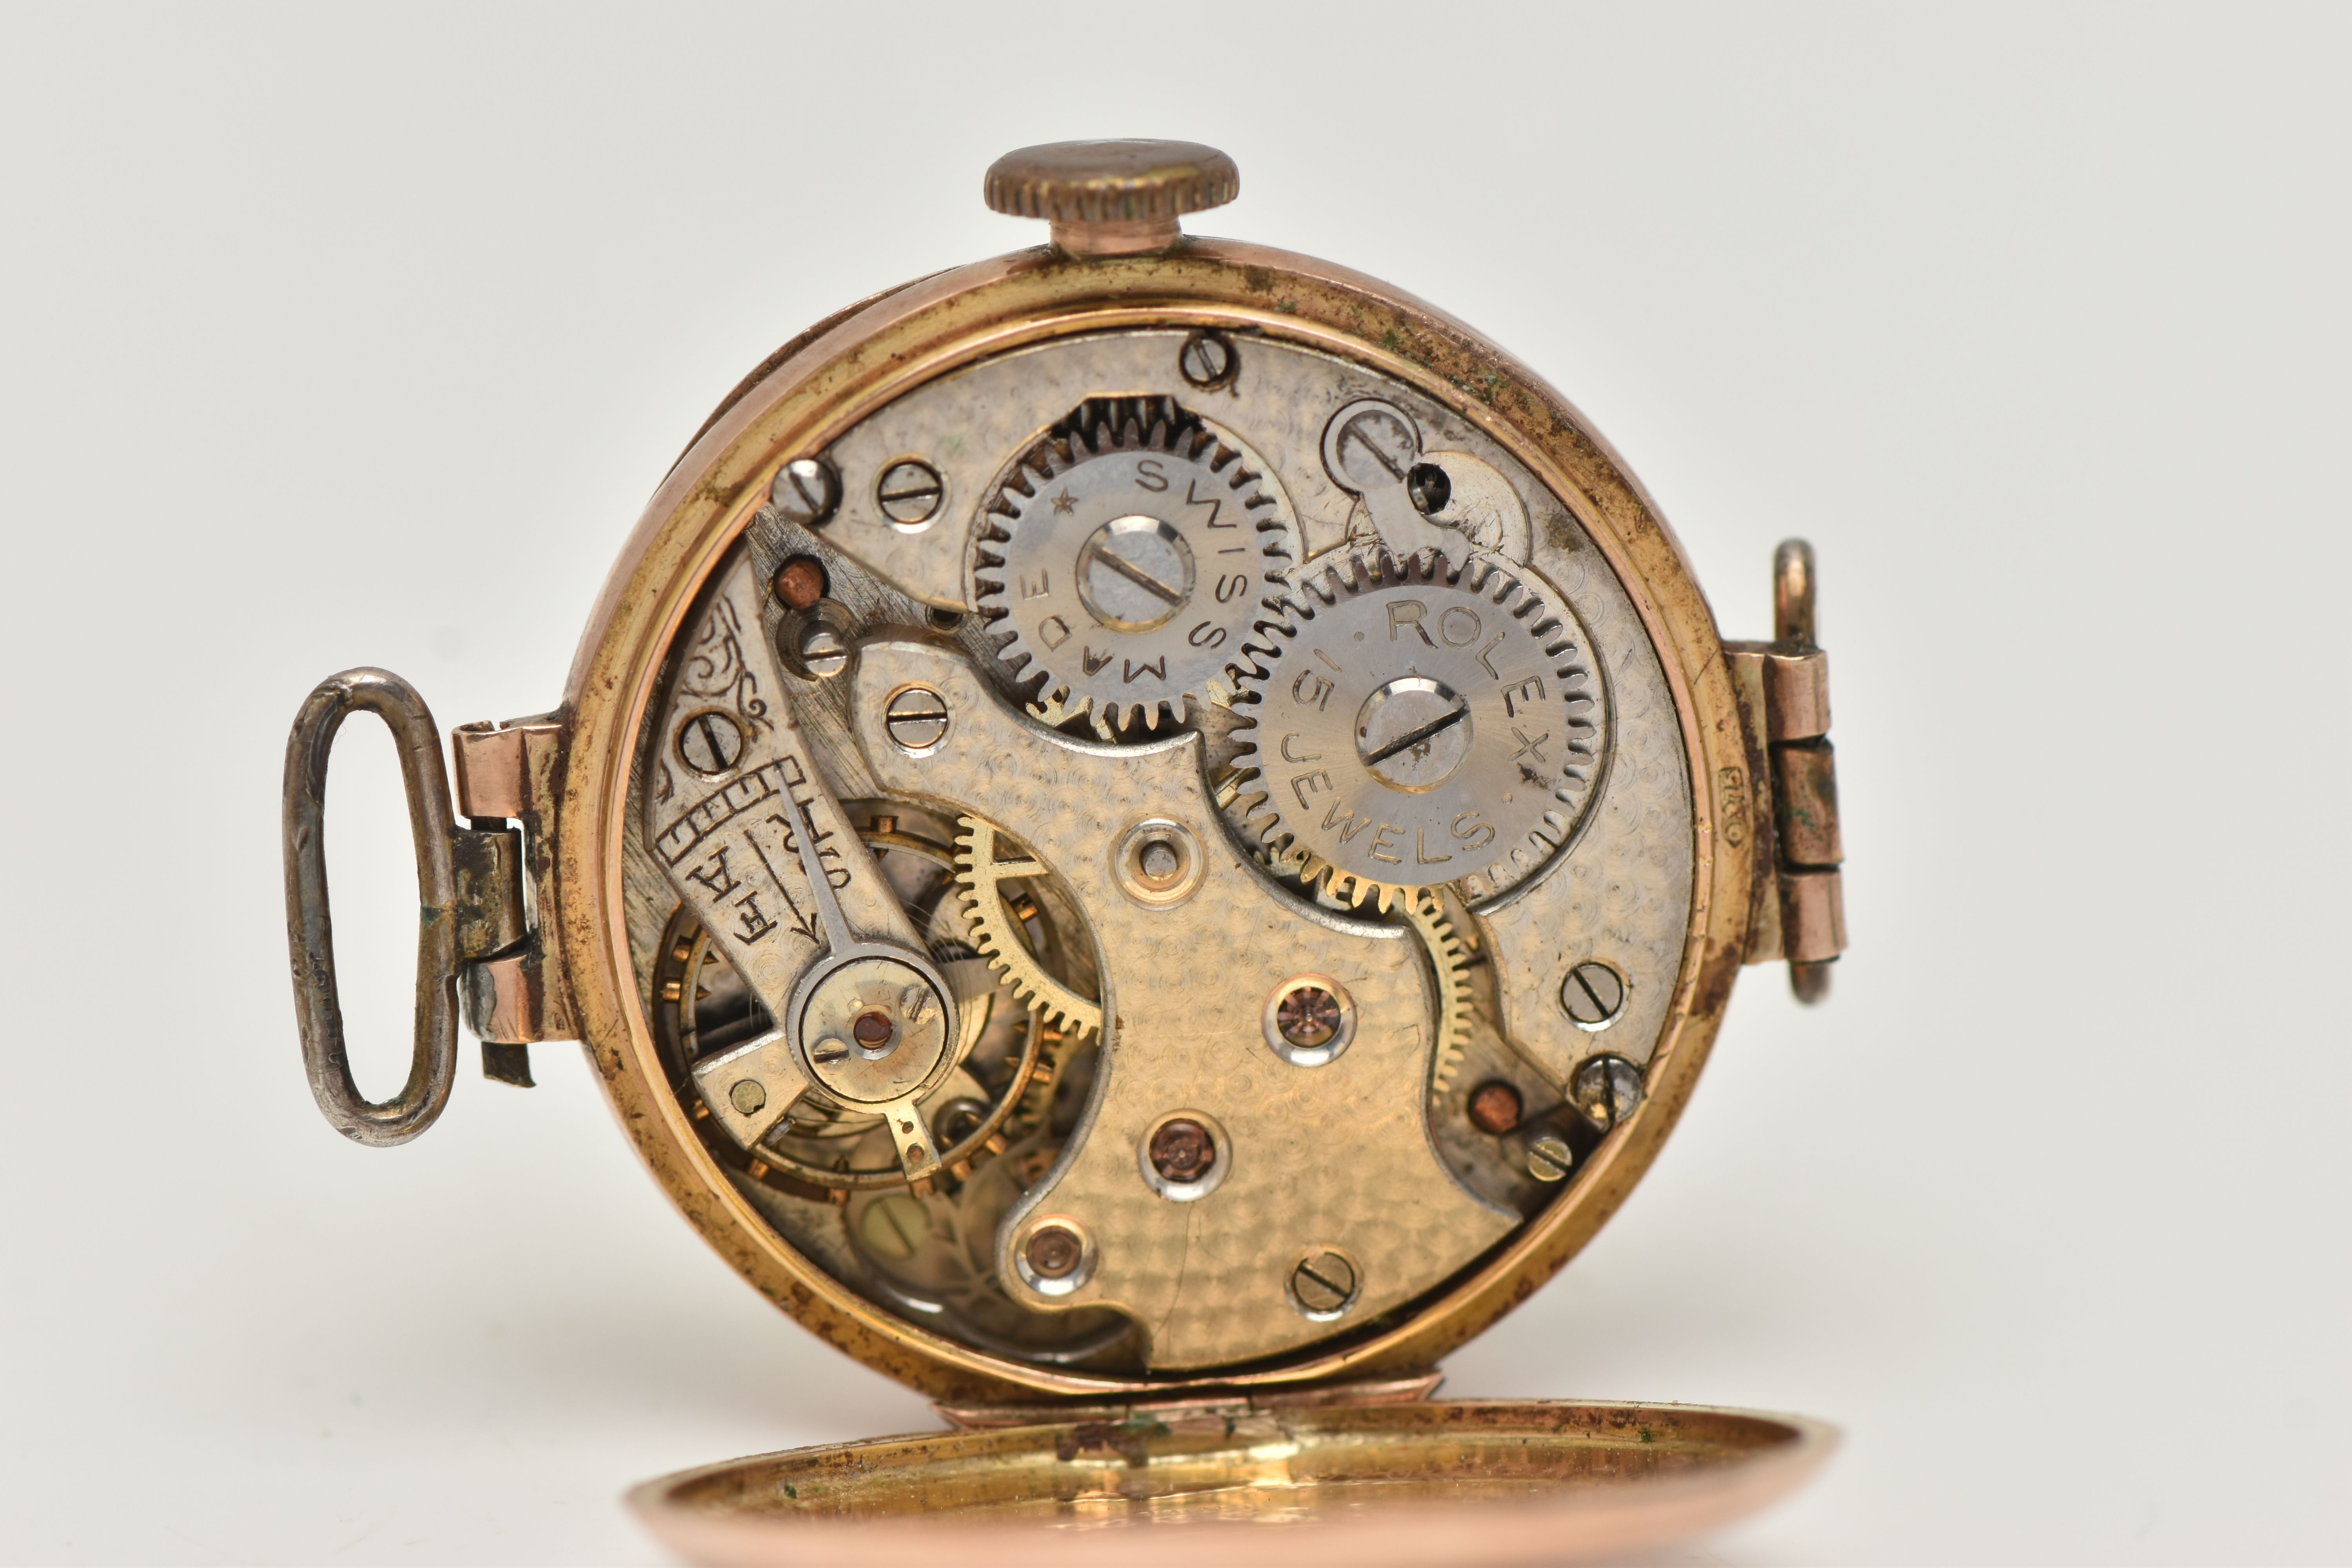 A 9CT GOLD 'ROLEX' WATCH HEAD, an early 20th century, manual wind watch head, round white dial, - Image 5 of 6